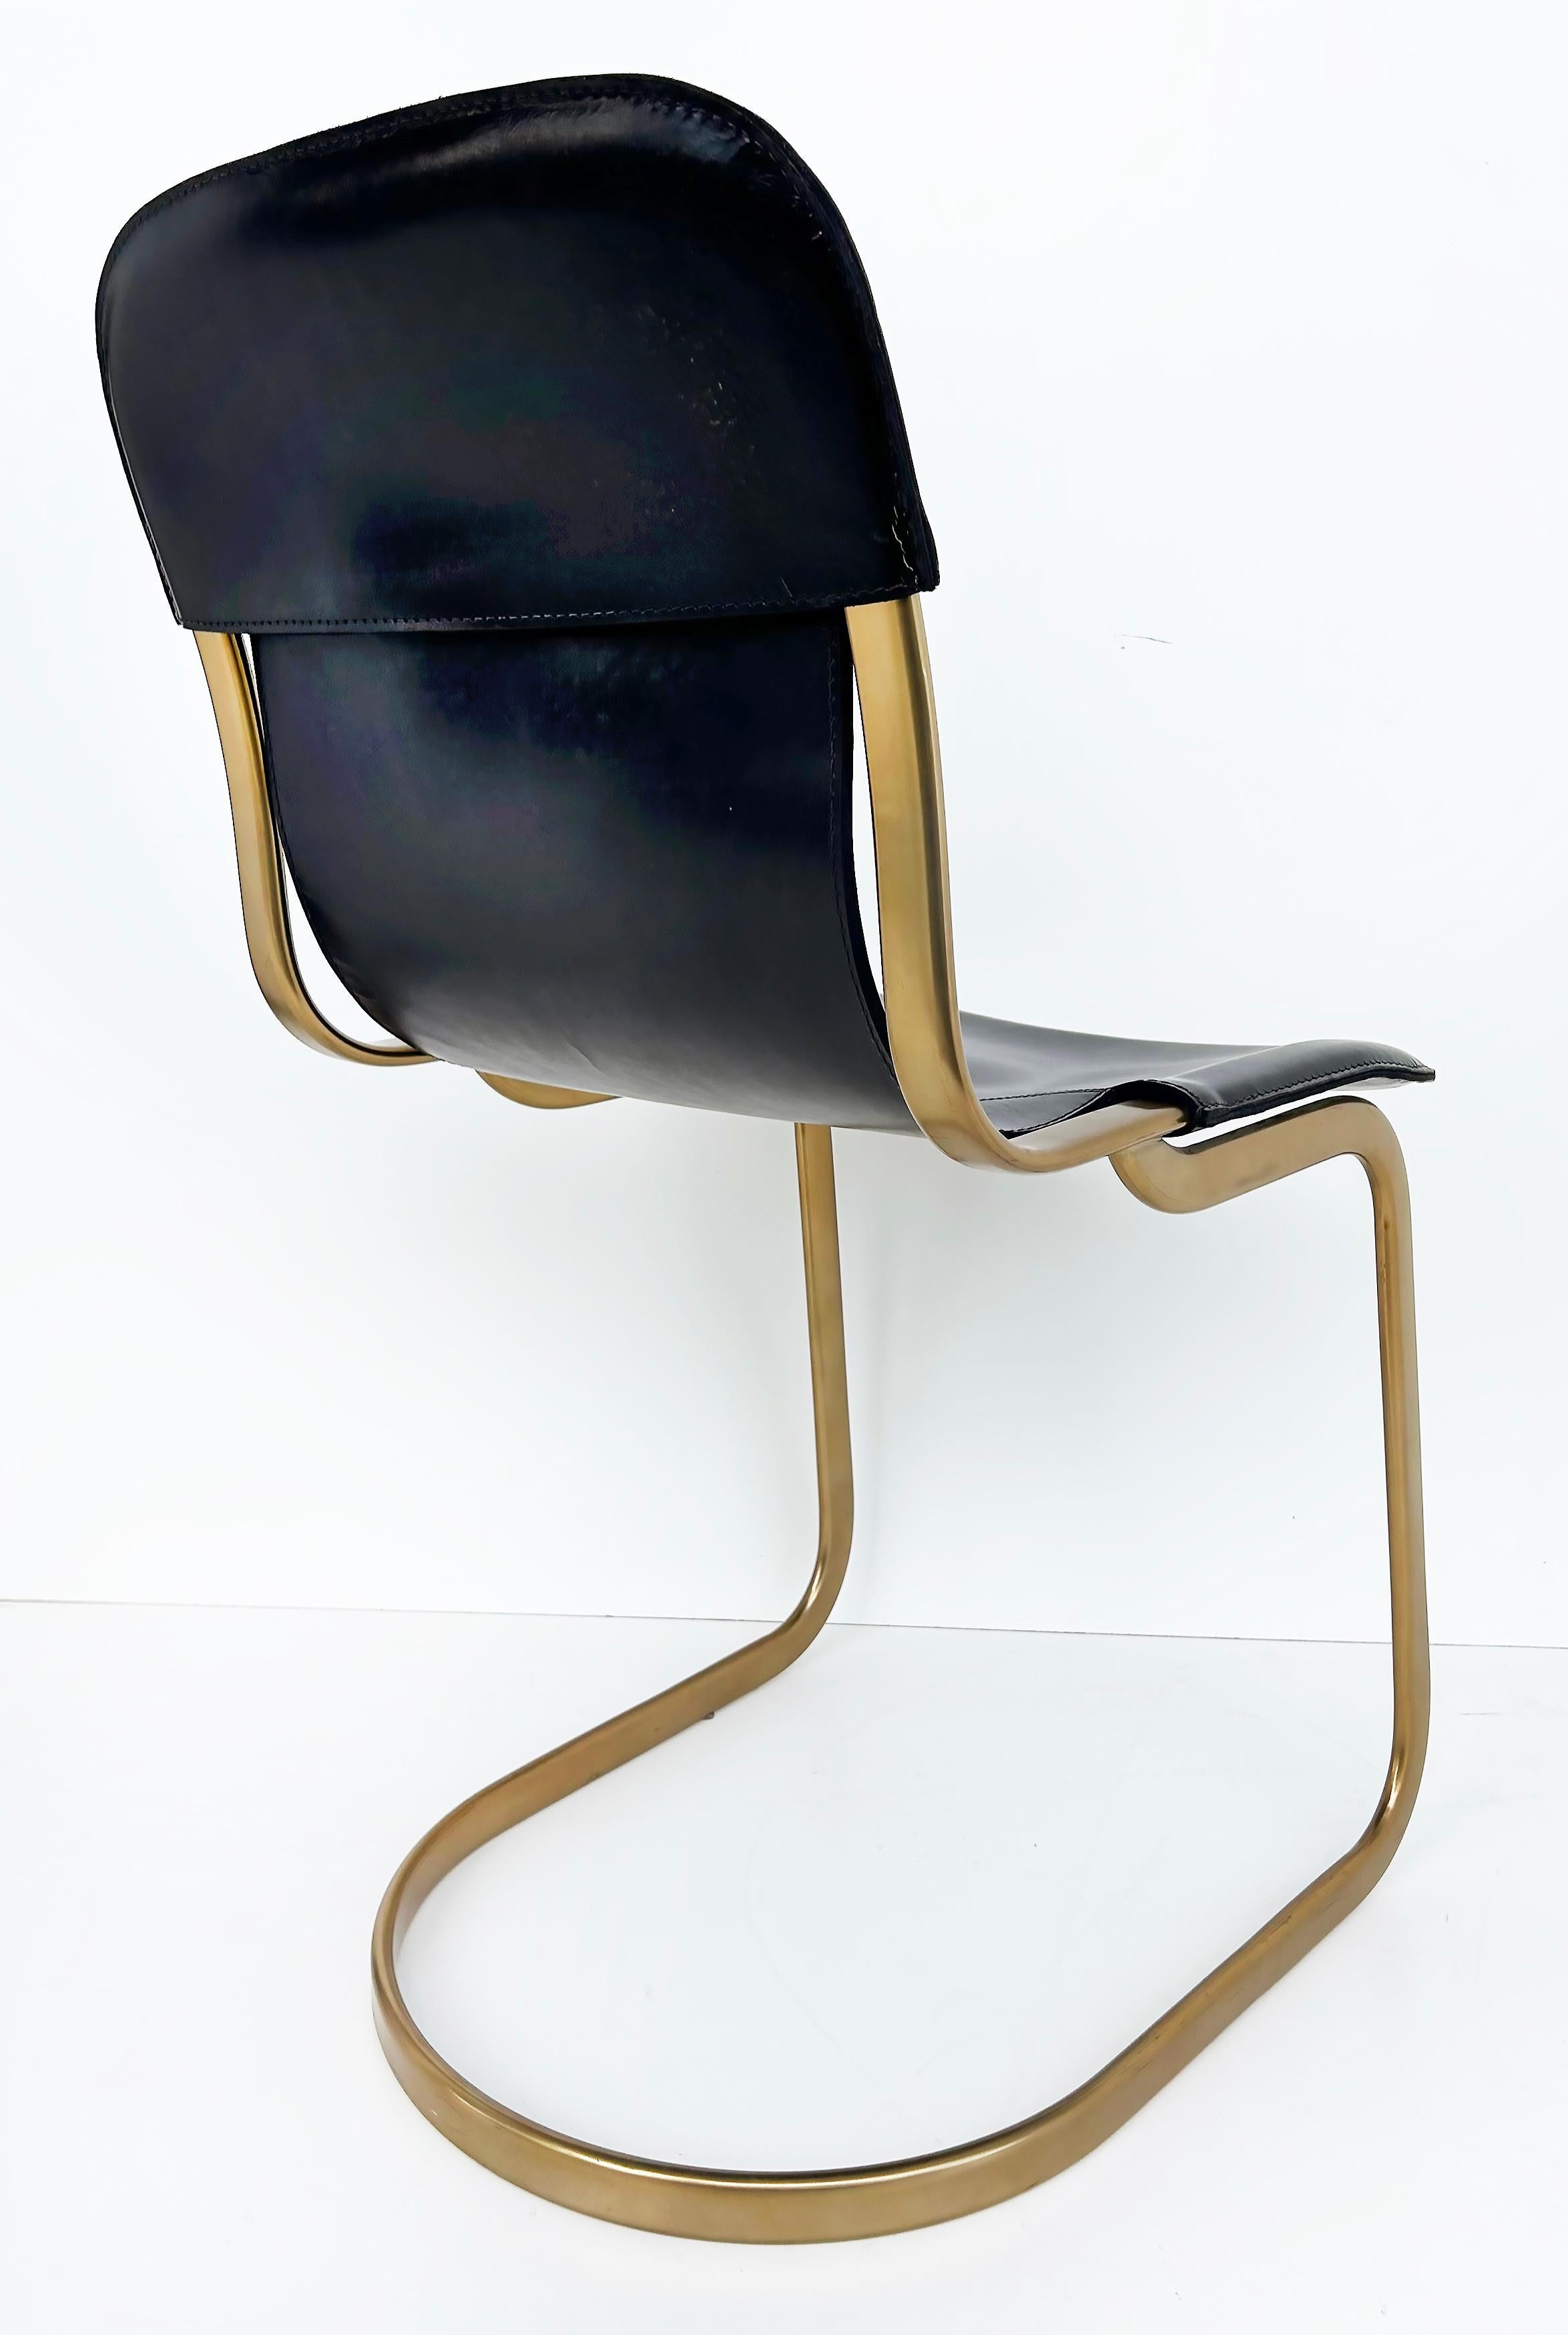 Contemporary Brass Plated Leather Cantilevered Dining Chairs After Willy Rizzo, Set of 6 For Sale